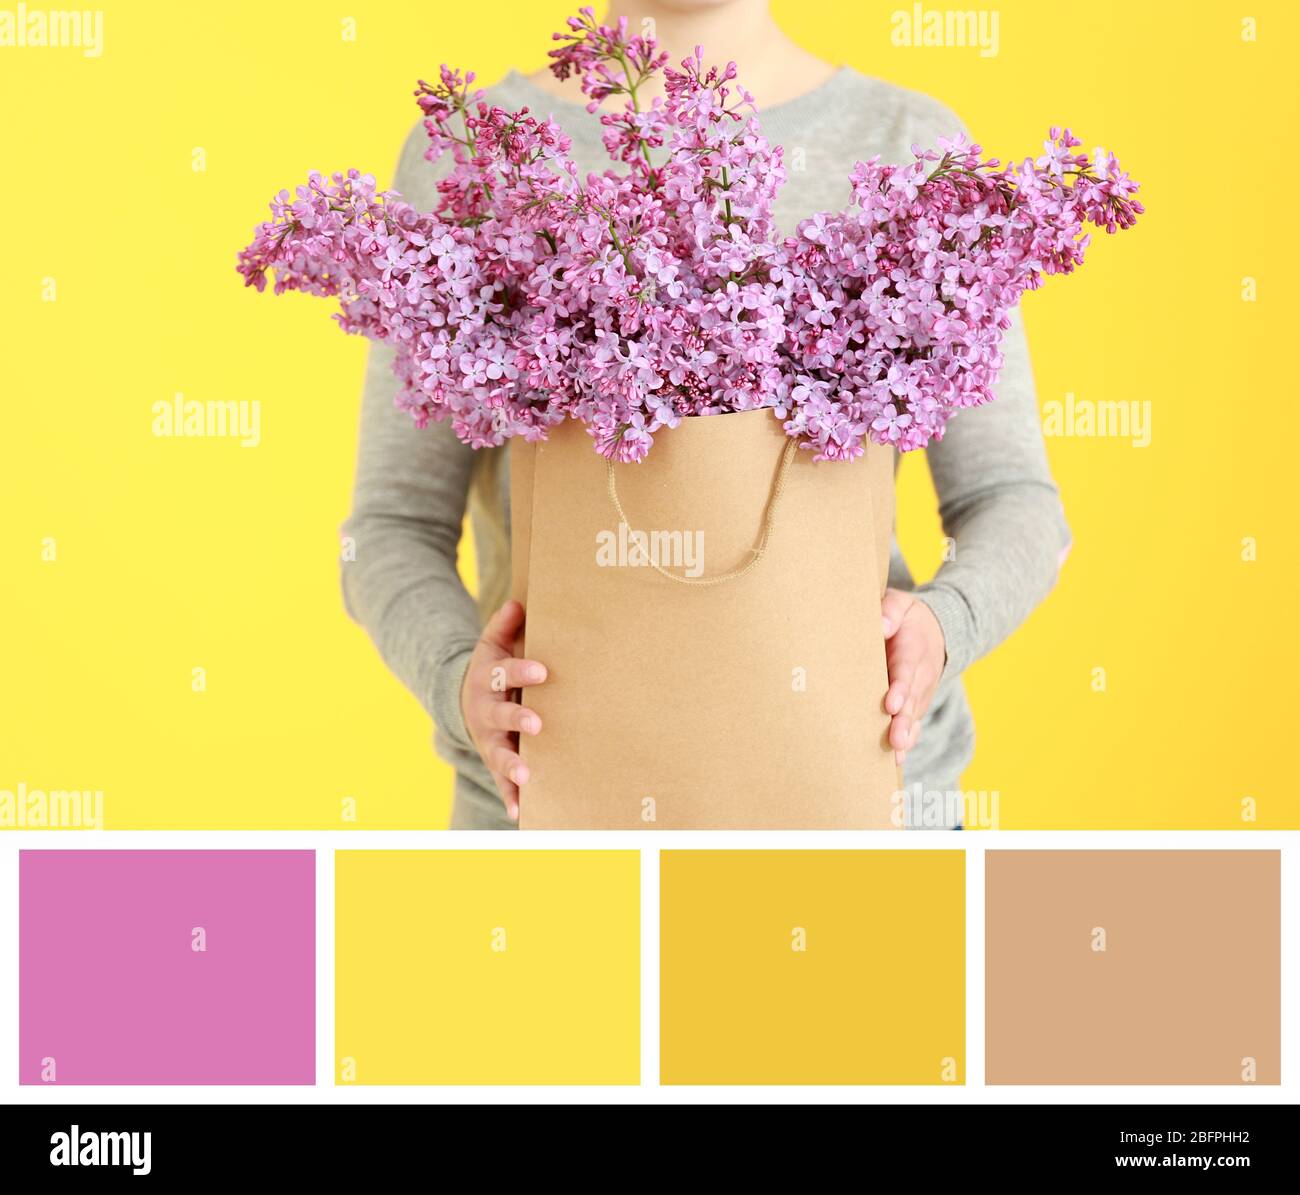 Color matching palette. Woman holding lilac flowers in paper bag on yellow background Stock Photo